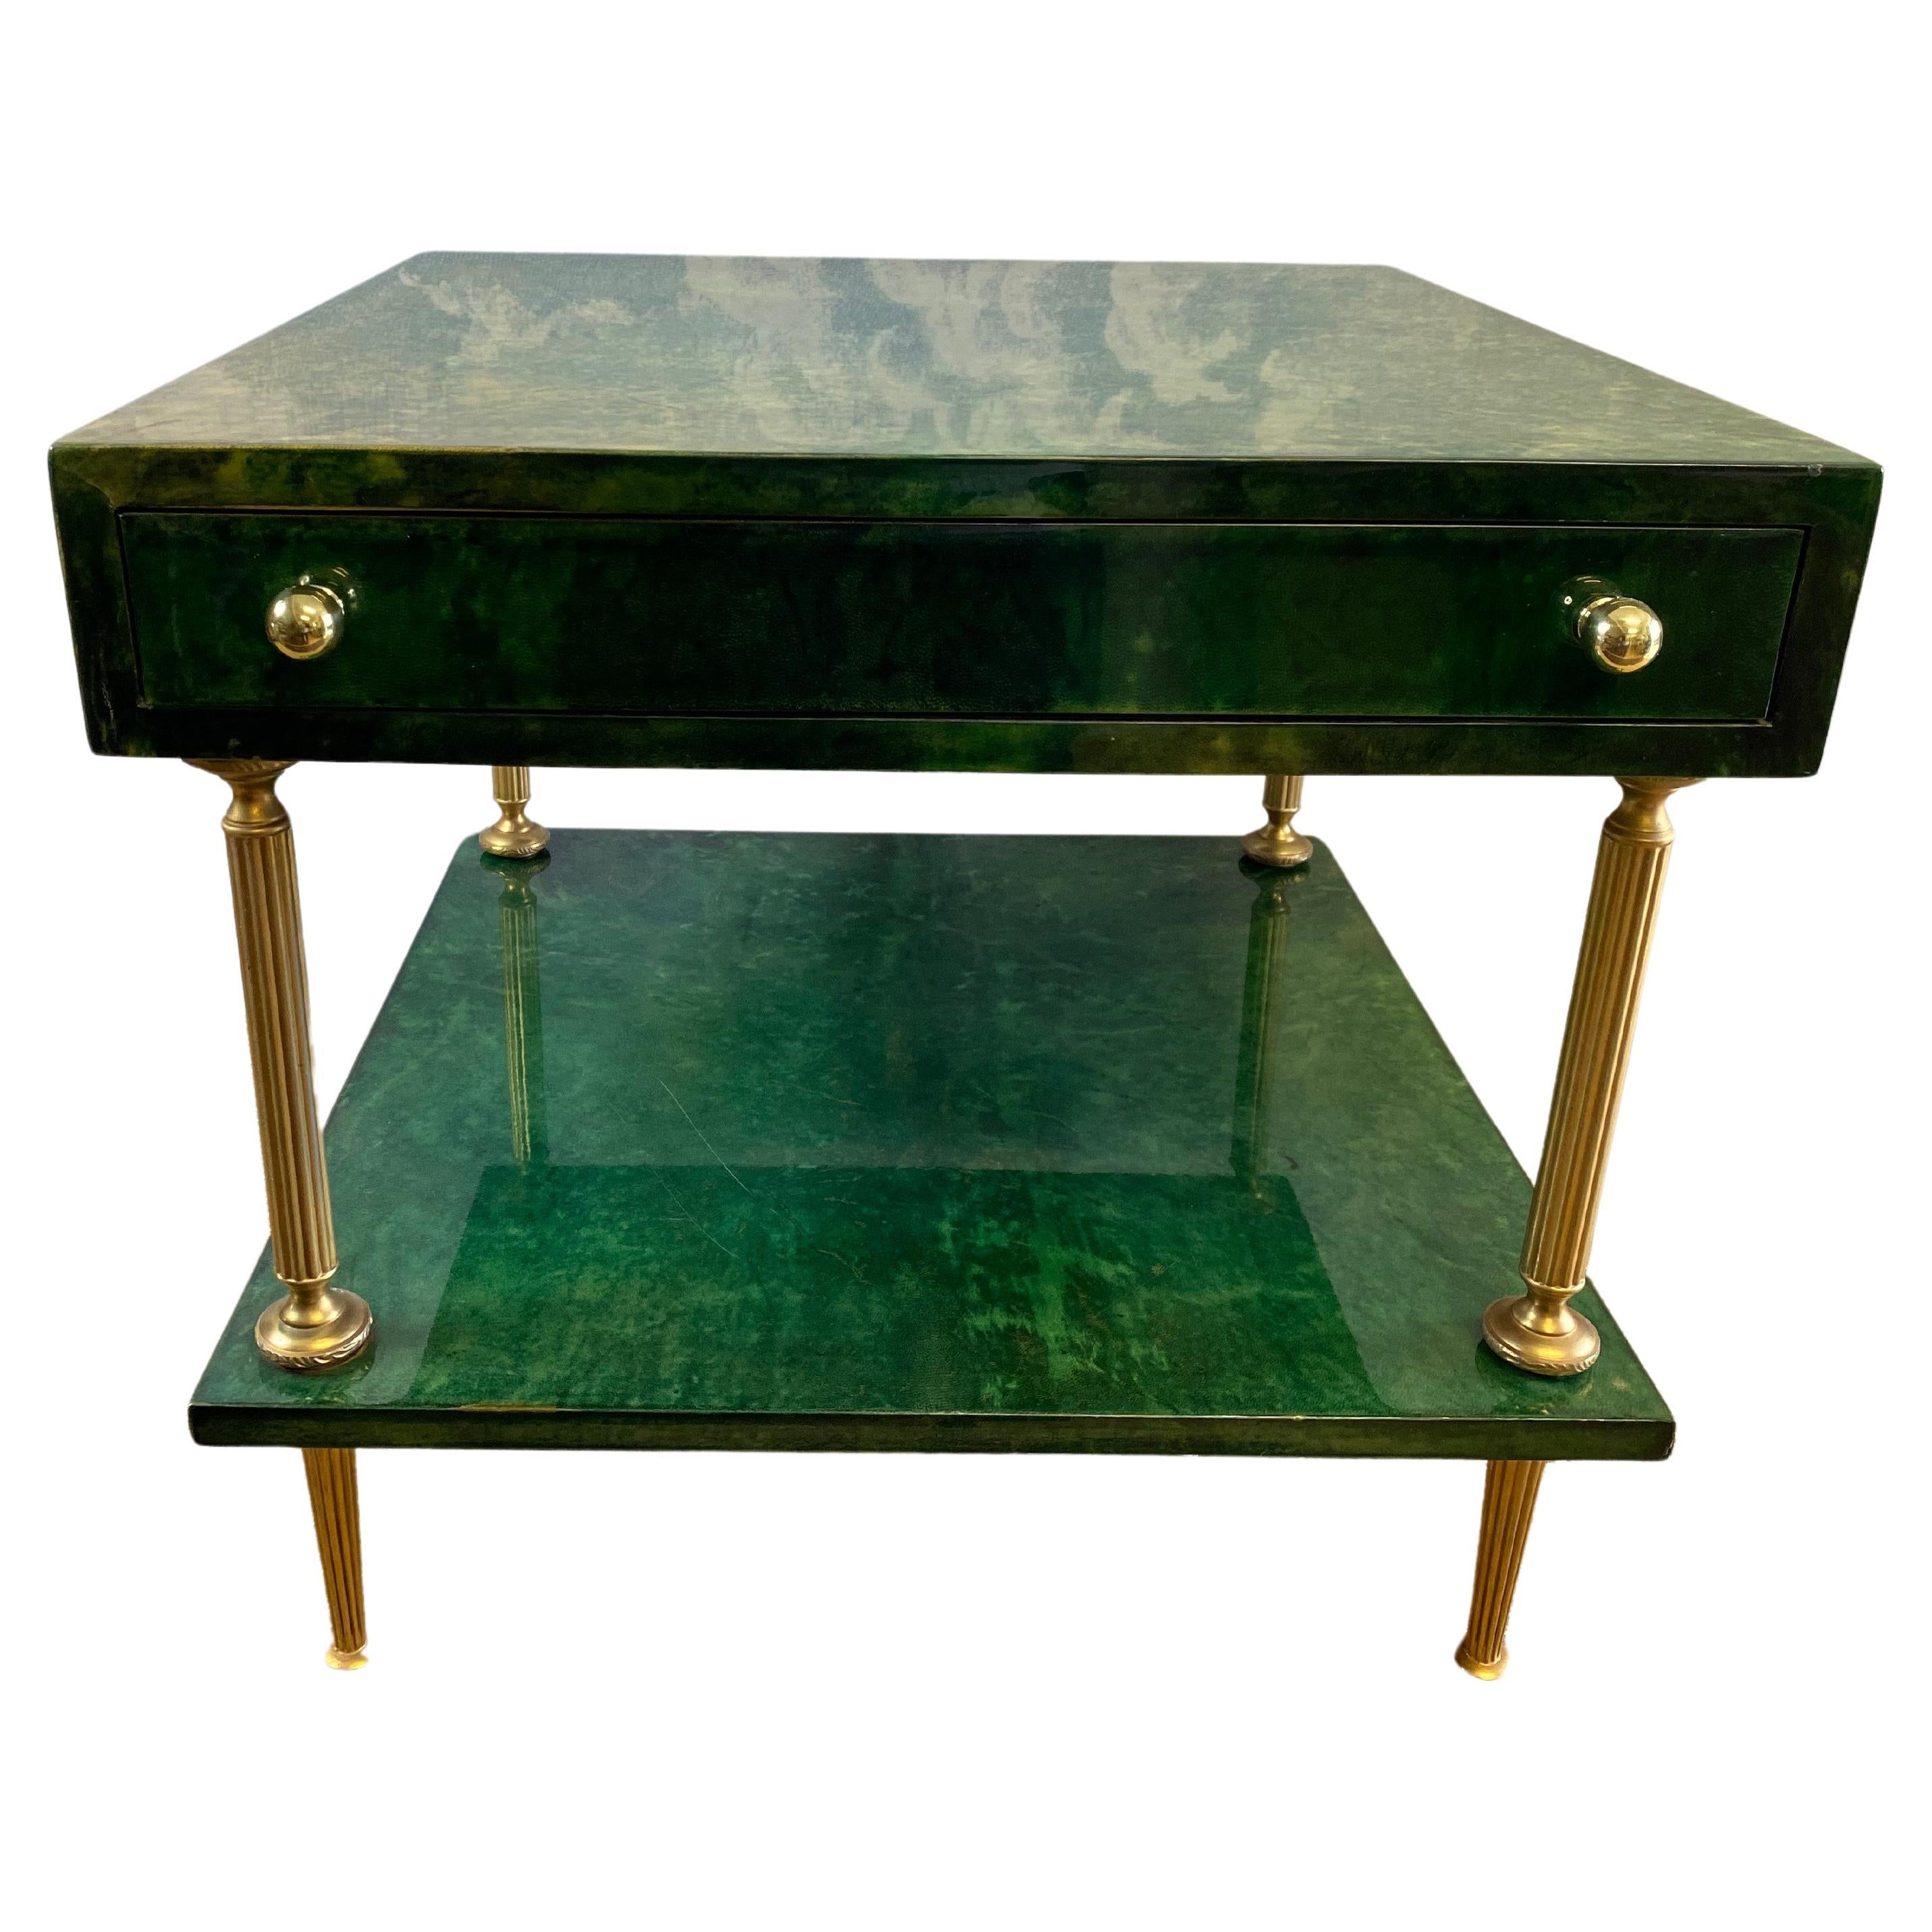 Aldo Tura Side Table in Emerald Green with Brass Legs and Two Drawers  For Sale